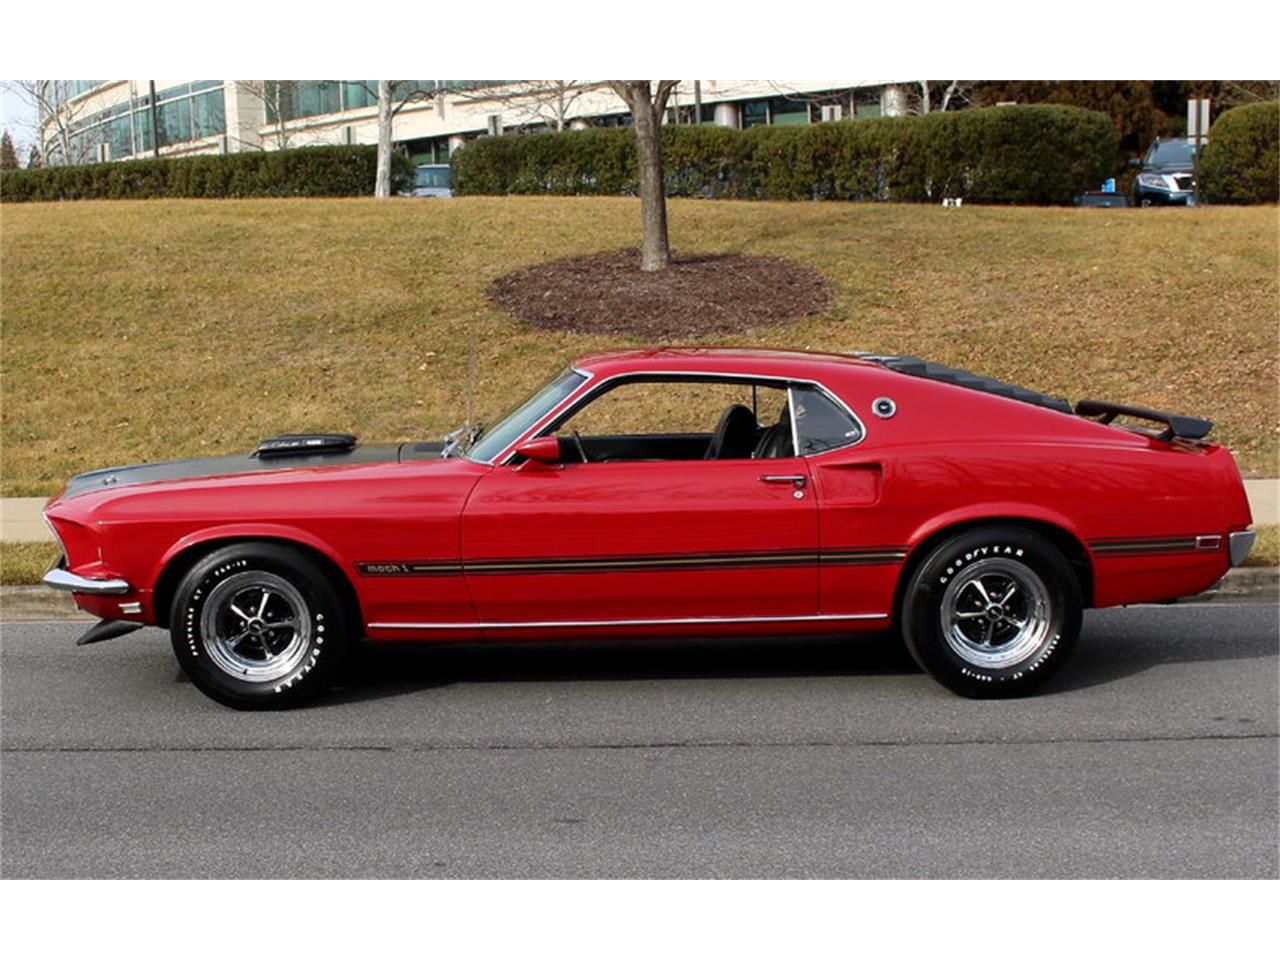 1969 Ford Mustang Mach 1 428 Cobra Jet for Sale | ClassicCars.com | CC ...